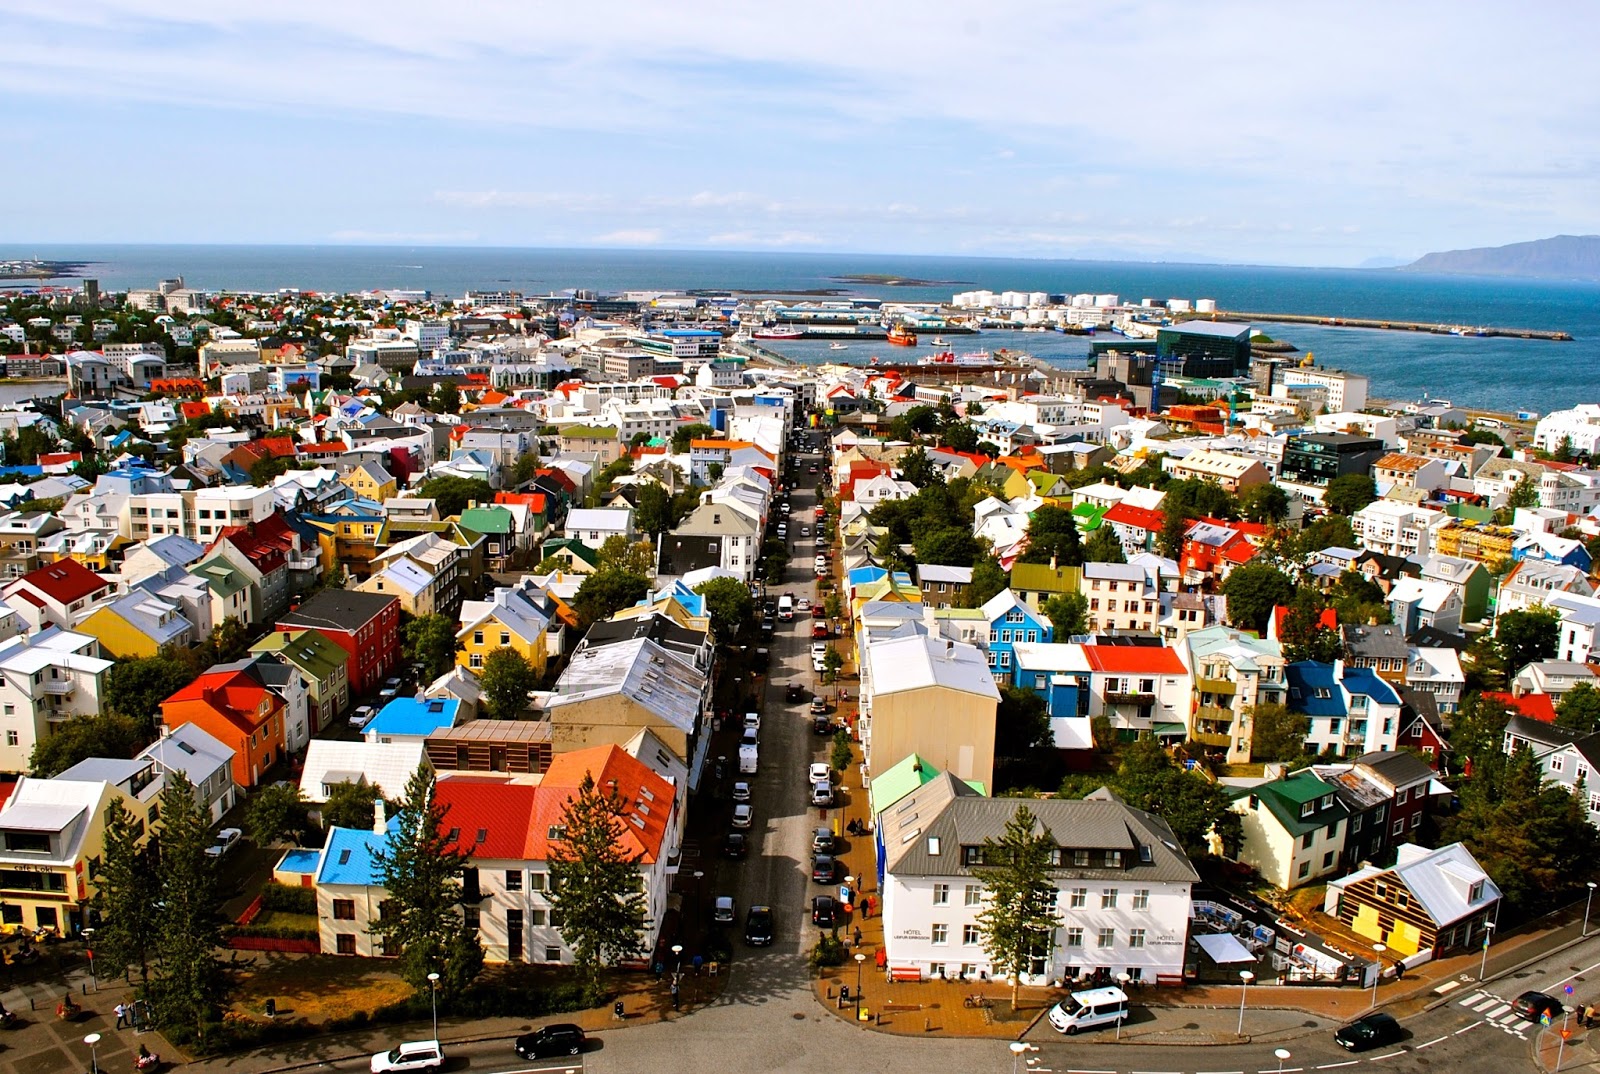 Things to do in Reykjavik Iceland : Admire the view from the Hallgrimskirkja church clock tower